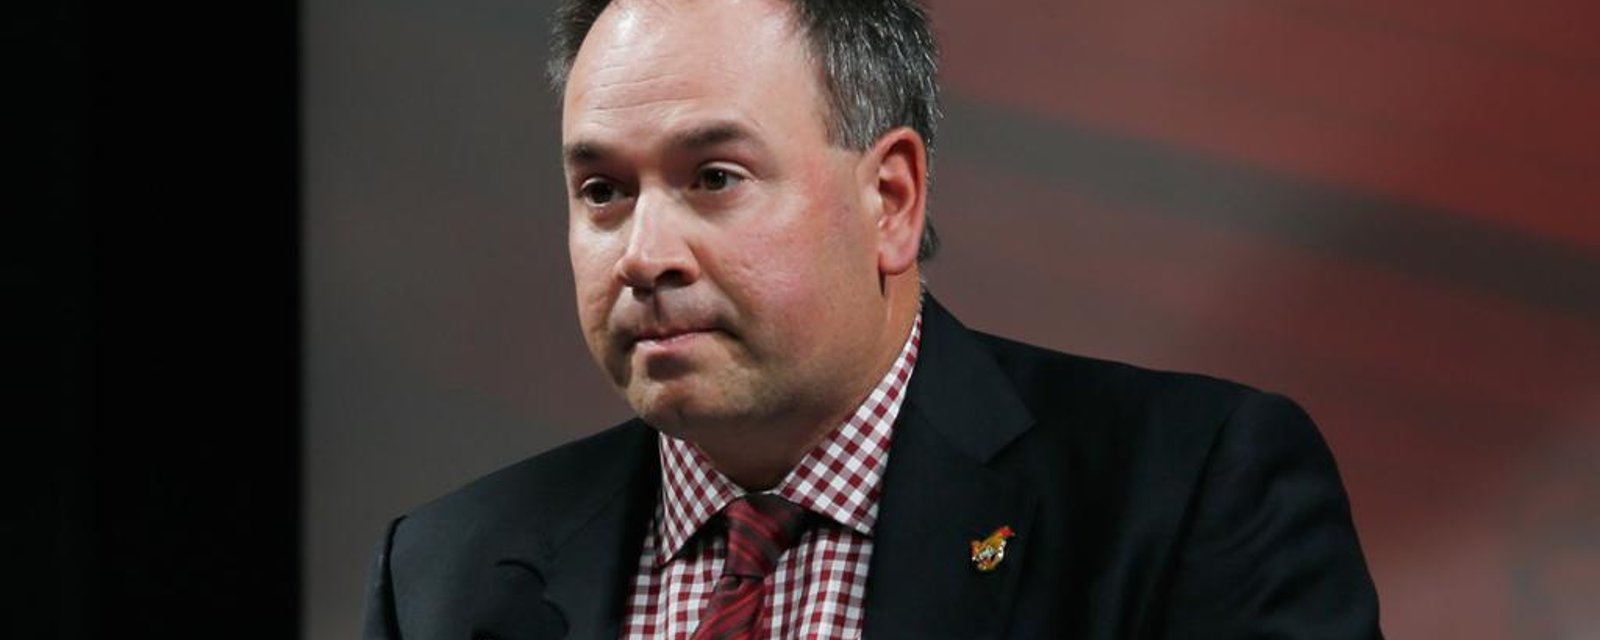 Pierre Dorion steals the show in media conference!